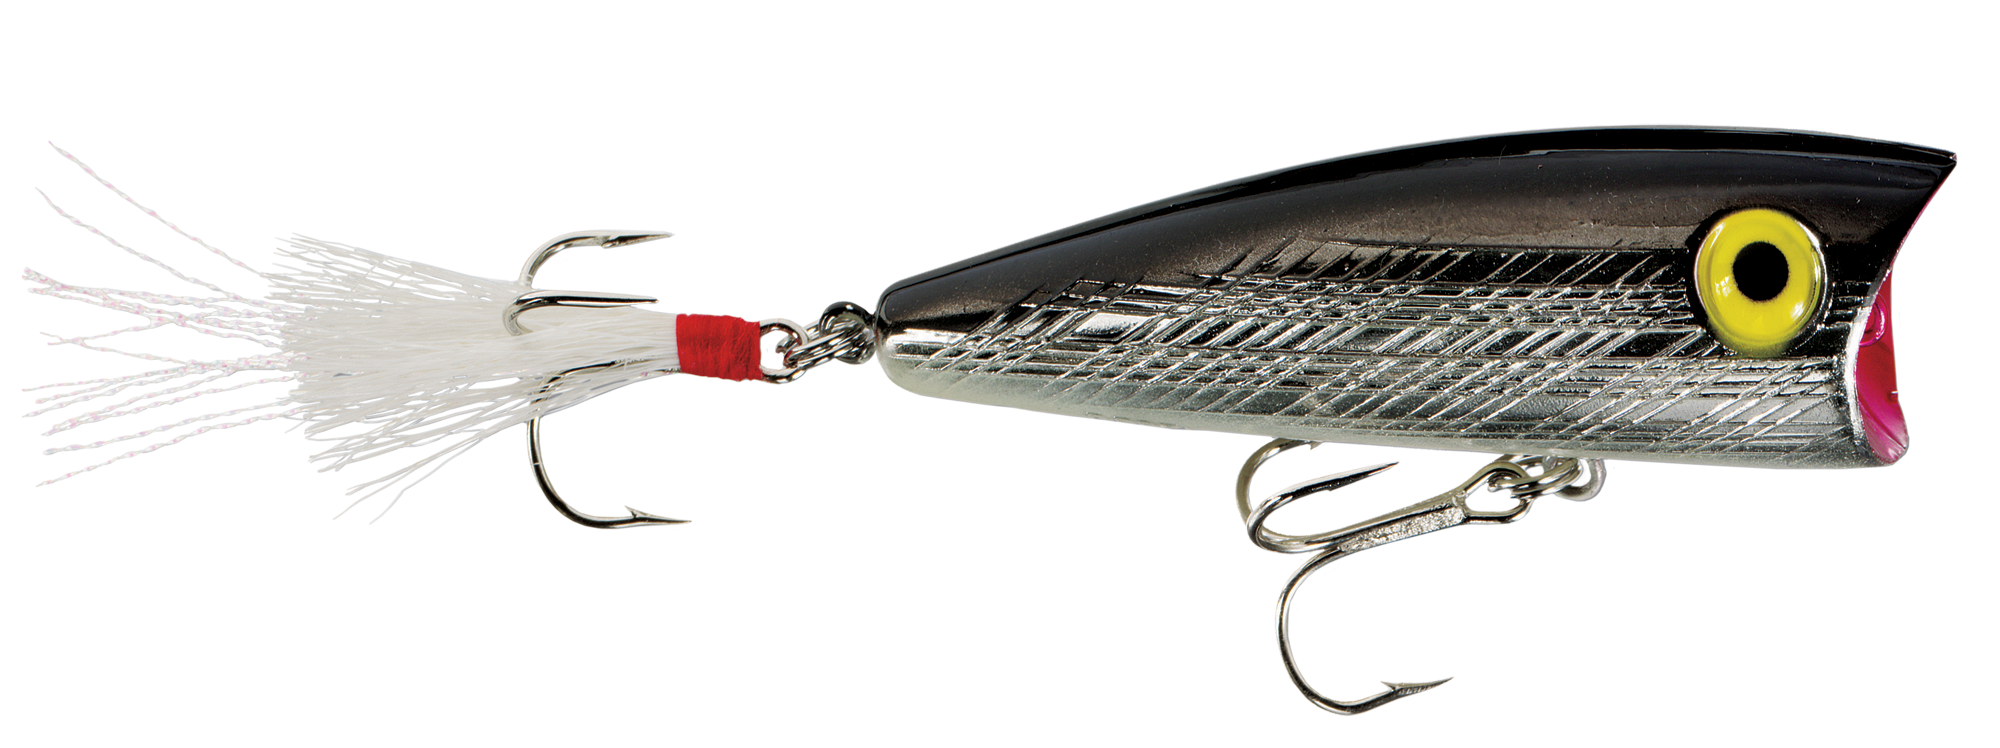 Fishing Lures: Rebel Teeny Pop-R catches nice bass 